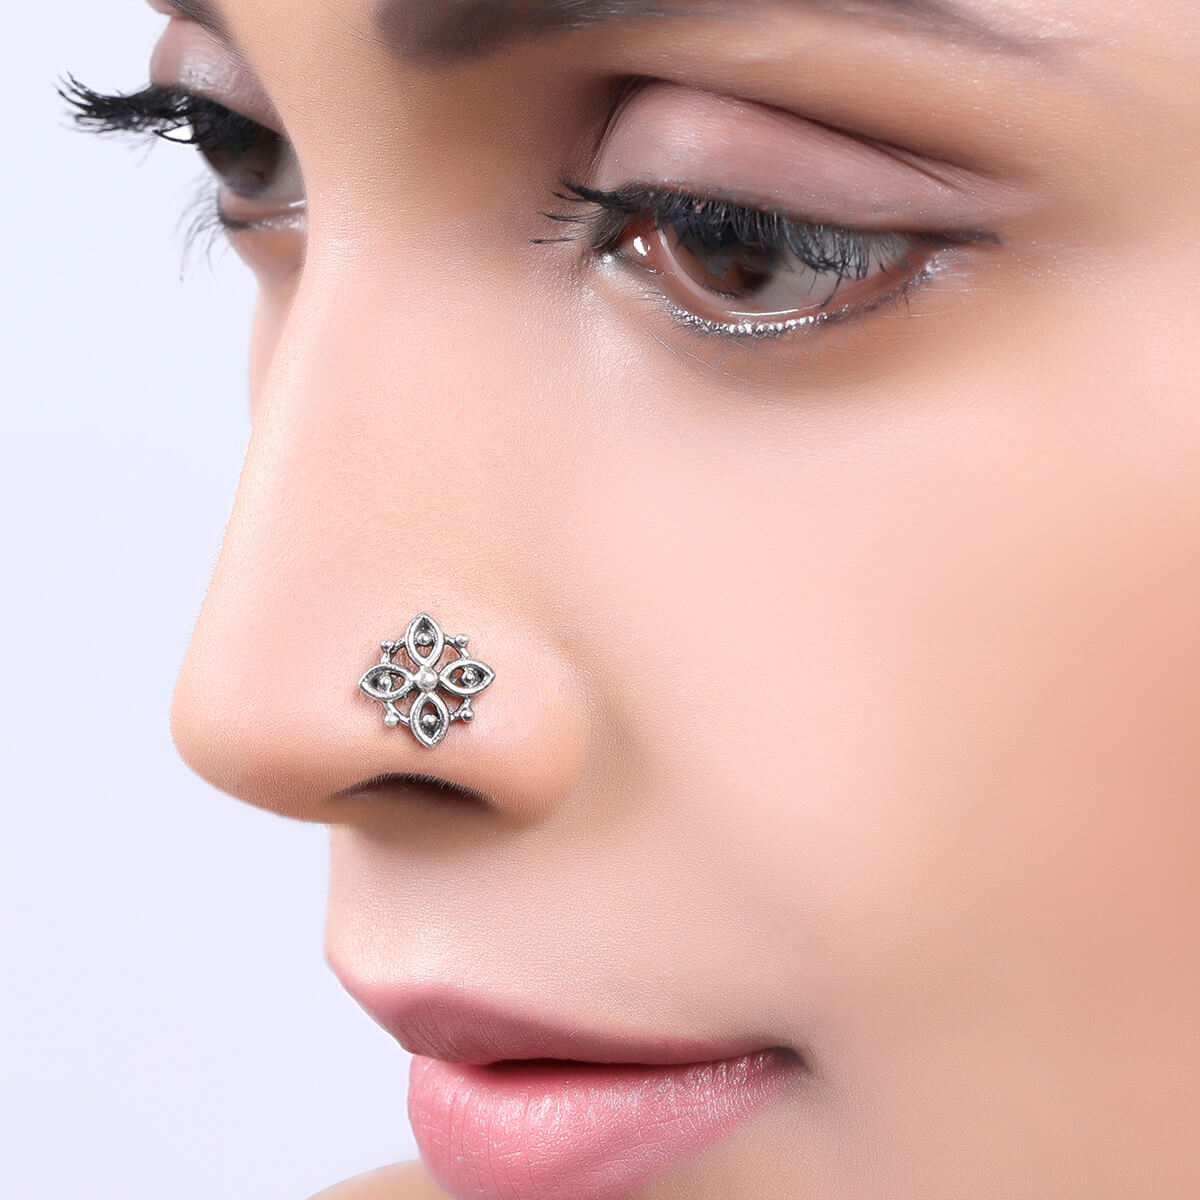 Buy Fashions Oxidised Metal, Silver Nose Ring Studs with Body Piercing  Jewellery Nose Pin for Women 6 pcs at Amazon.in